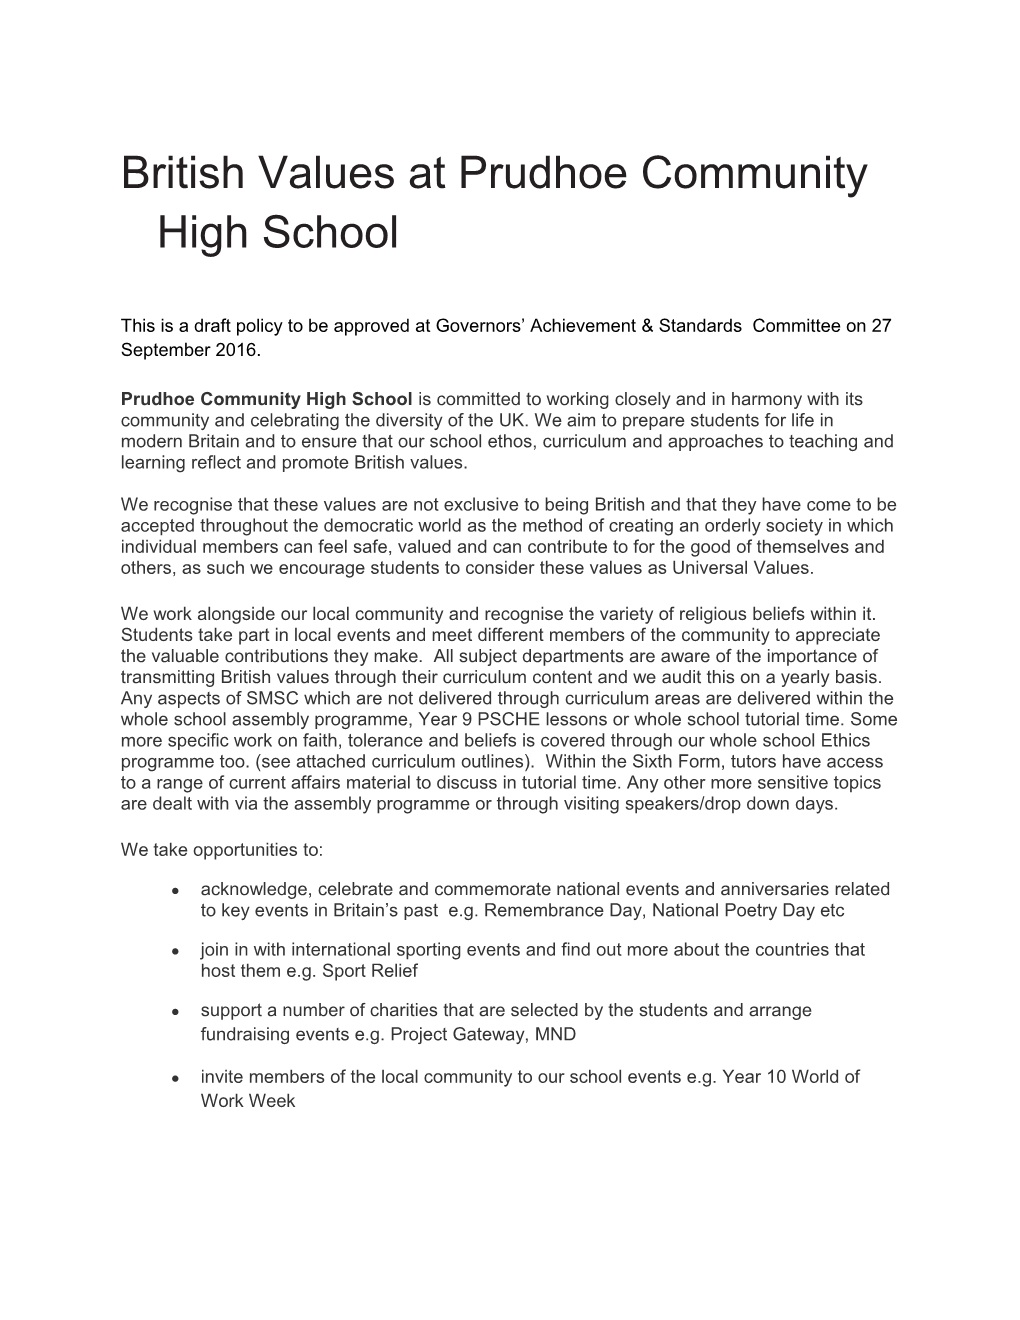 British Values at Prudhoe Community High School